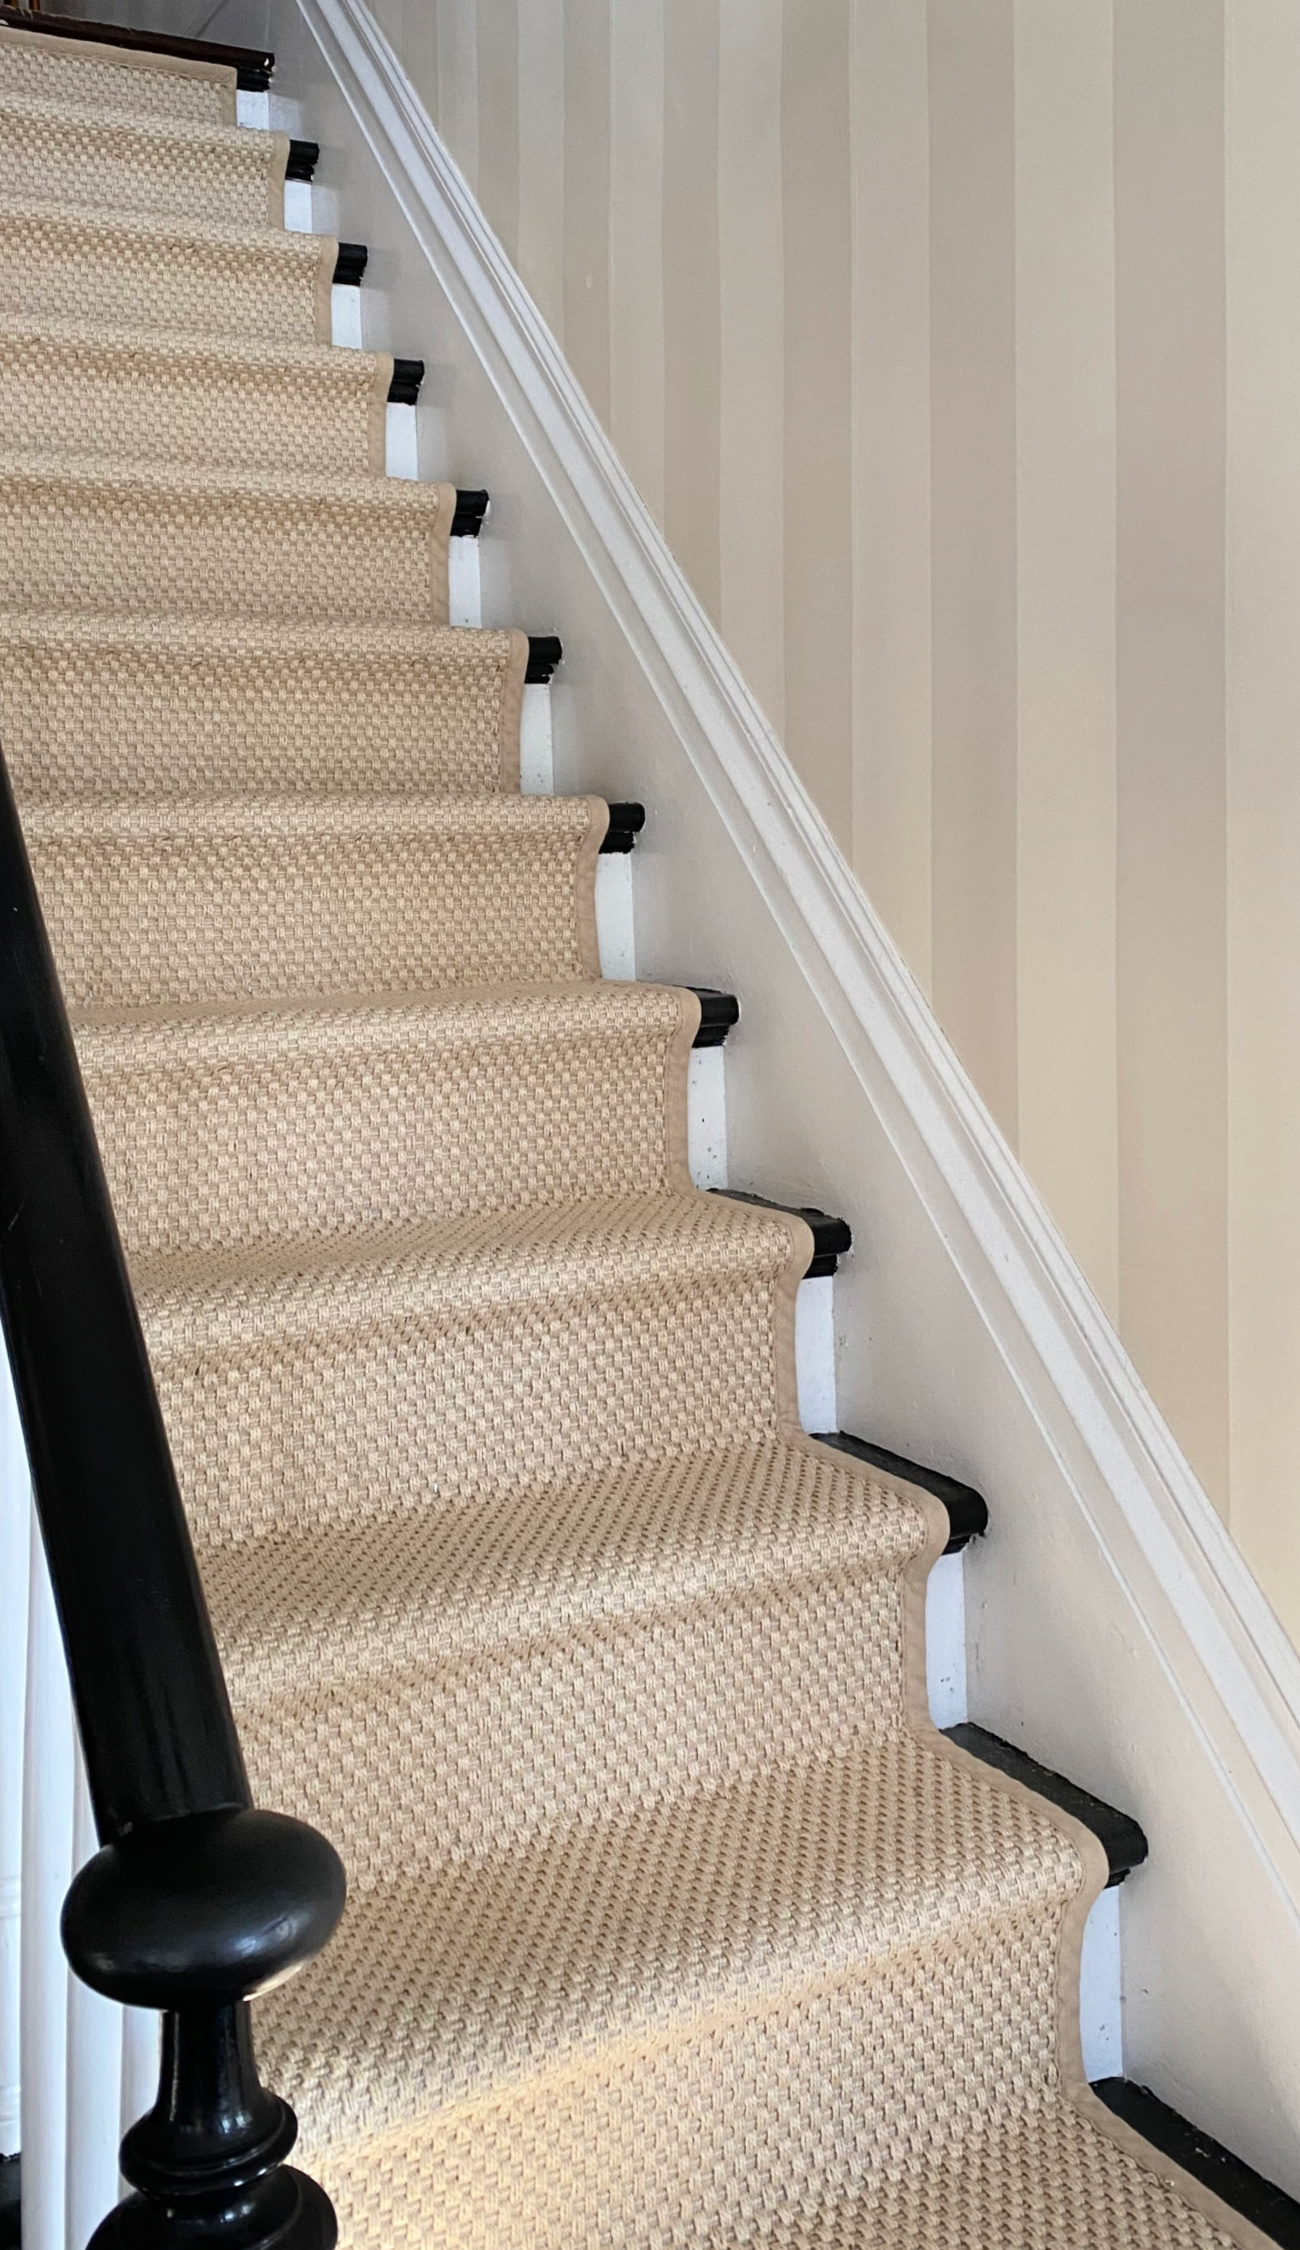 installing a stair runner yourself is easier than you think